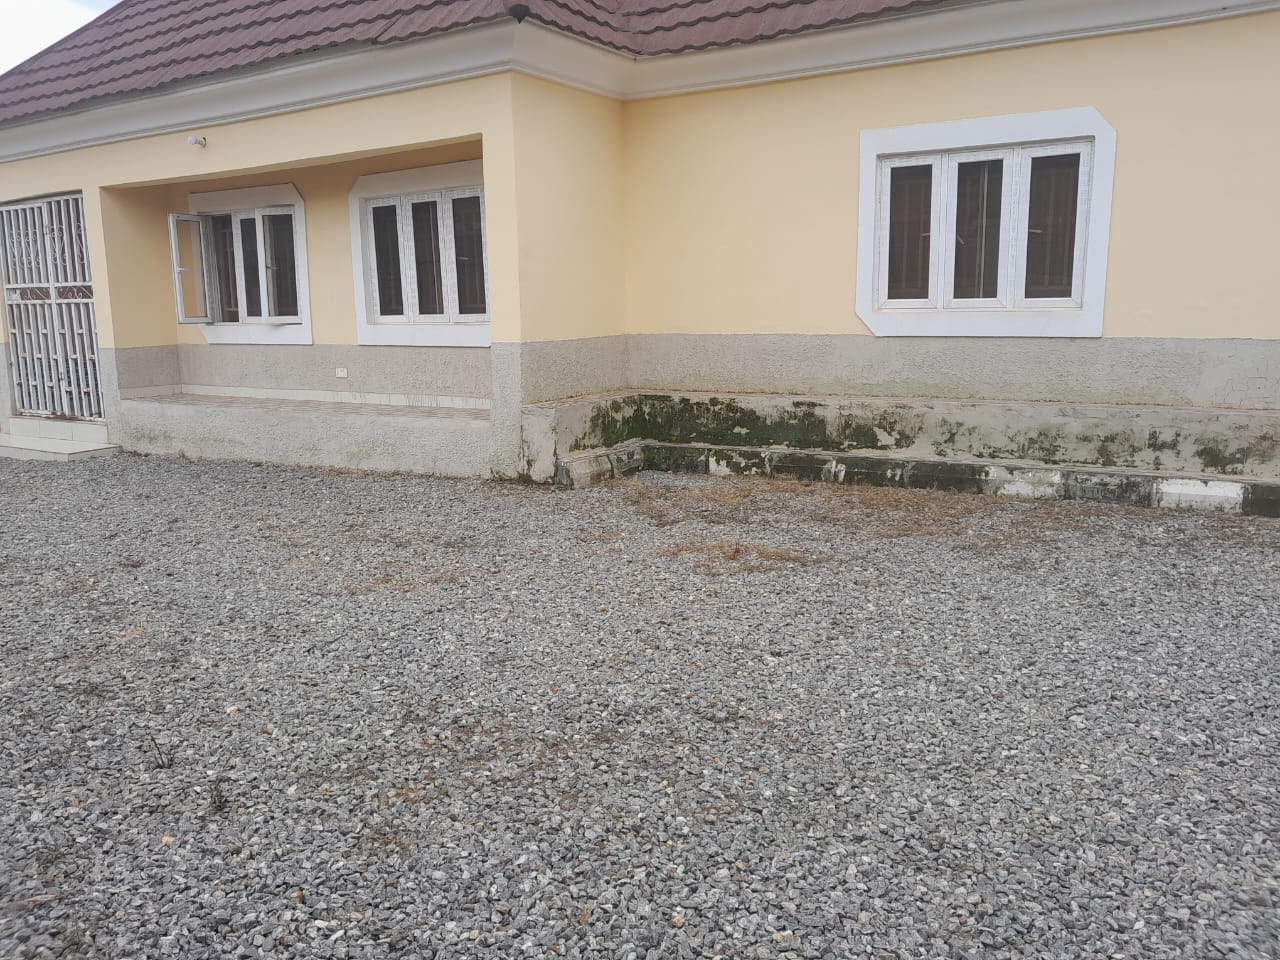 3 Bedroom Bungalow with Bq foundation available for sale in sunnyvale lokogoma